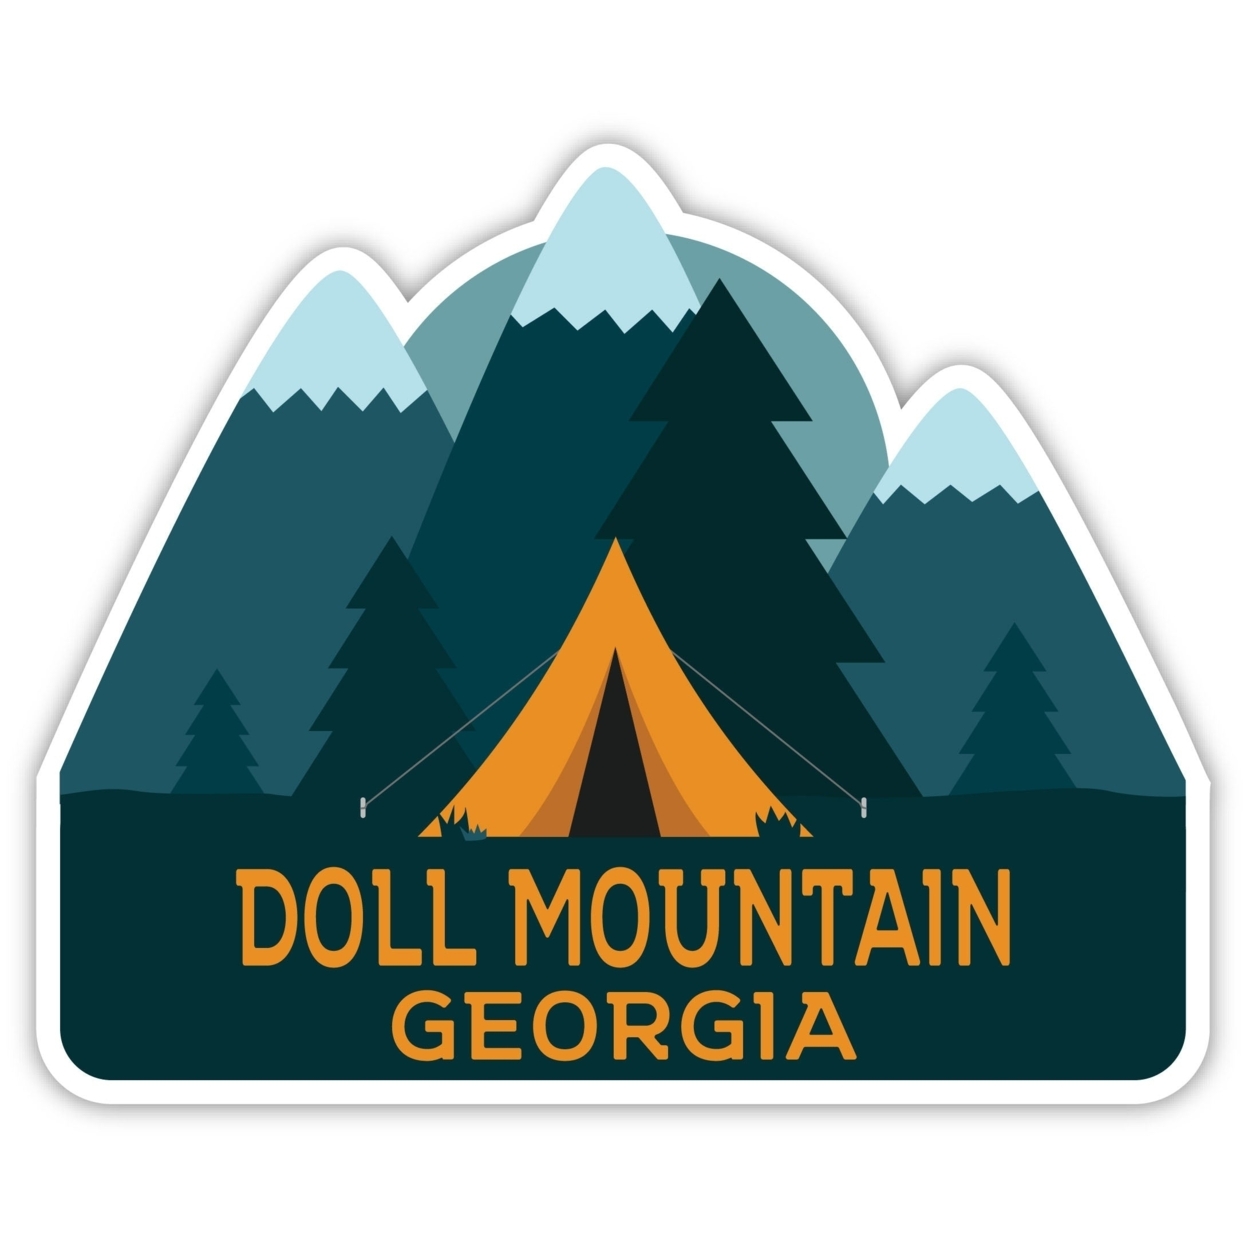 Doll Mountain Georgia Souvenir Decorative Stickers (Choose Theme And Size) - 4-Pack, 12-Inch, Tent